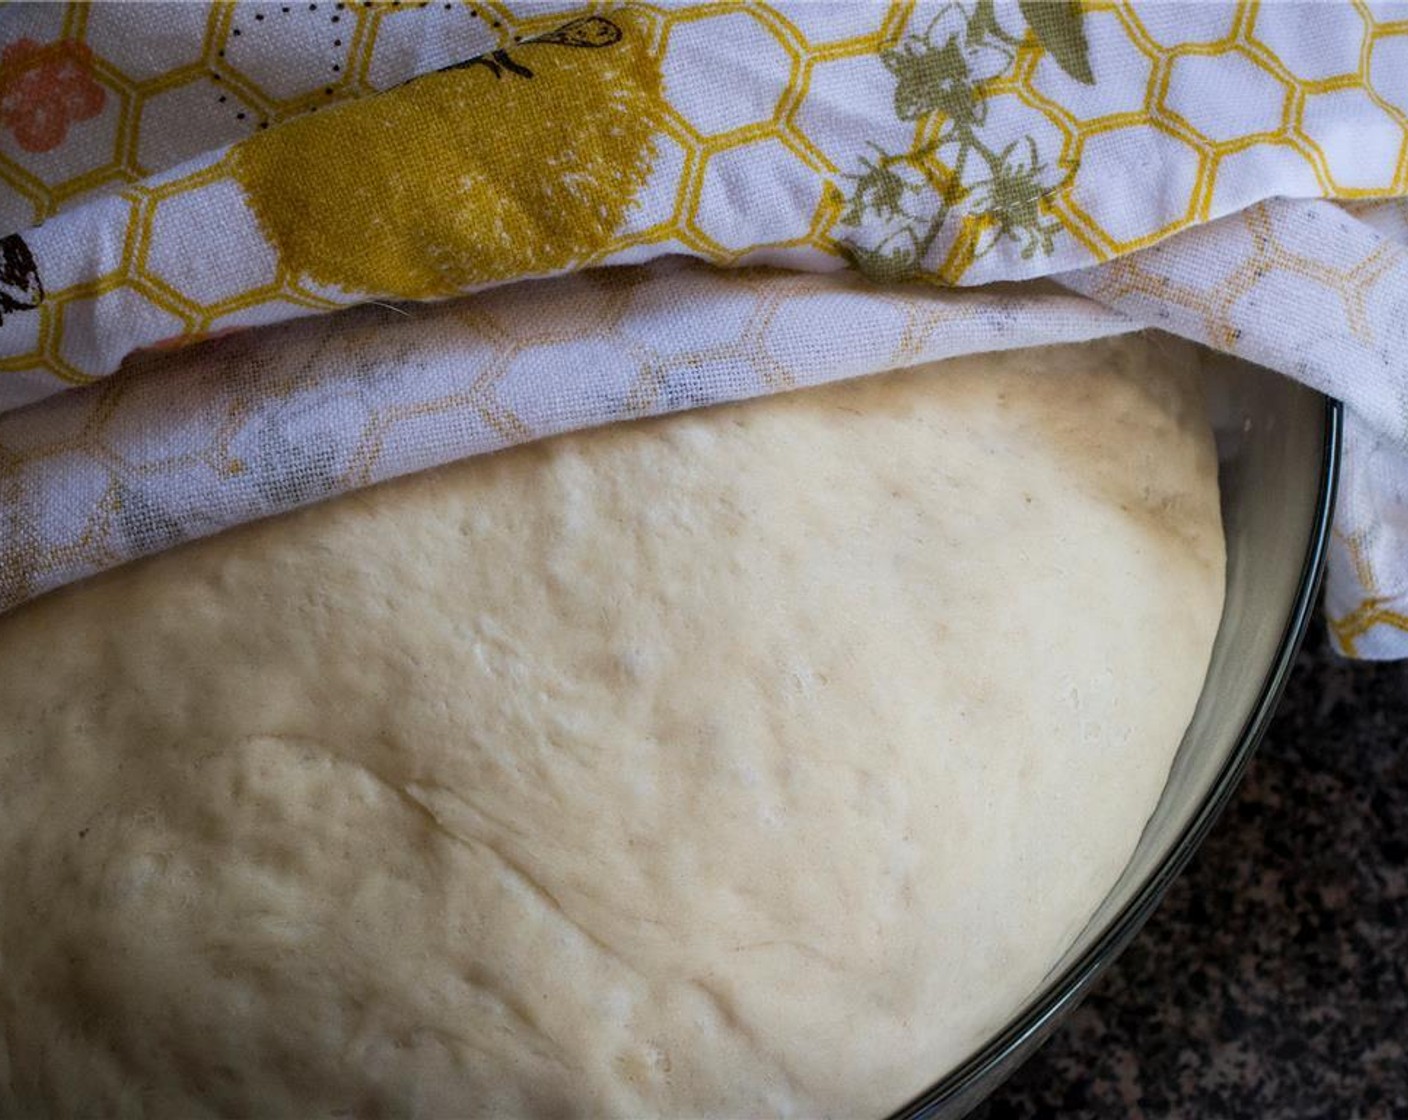 step 4 Transfer the dough to a large oiled bowl and cover with a moist tea towel. Let it sit in a warm place for 1 hour.